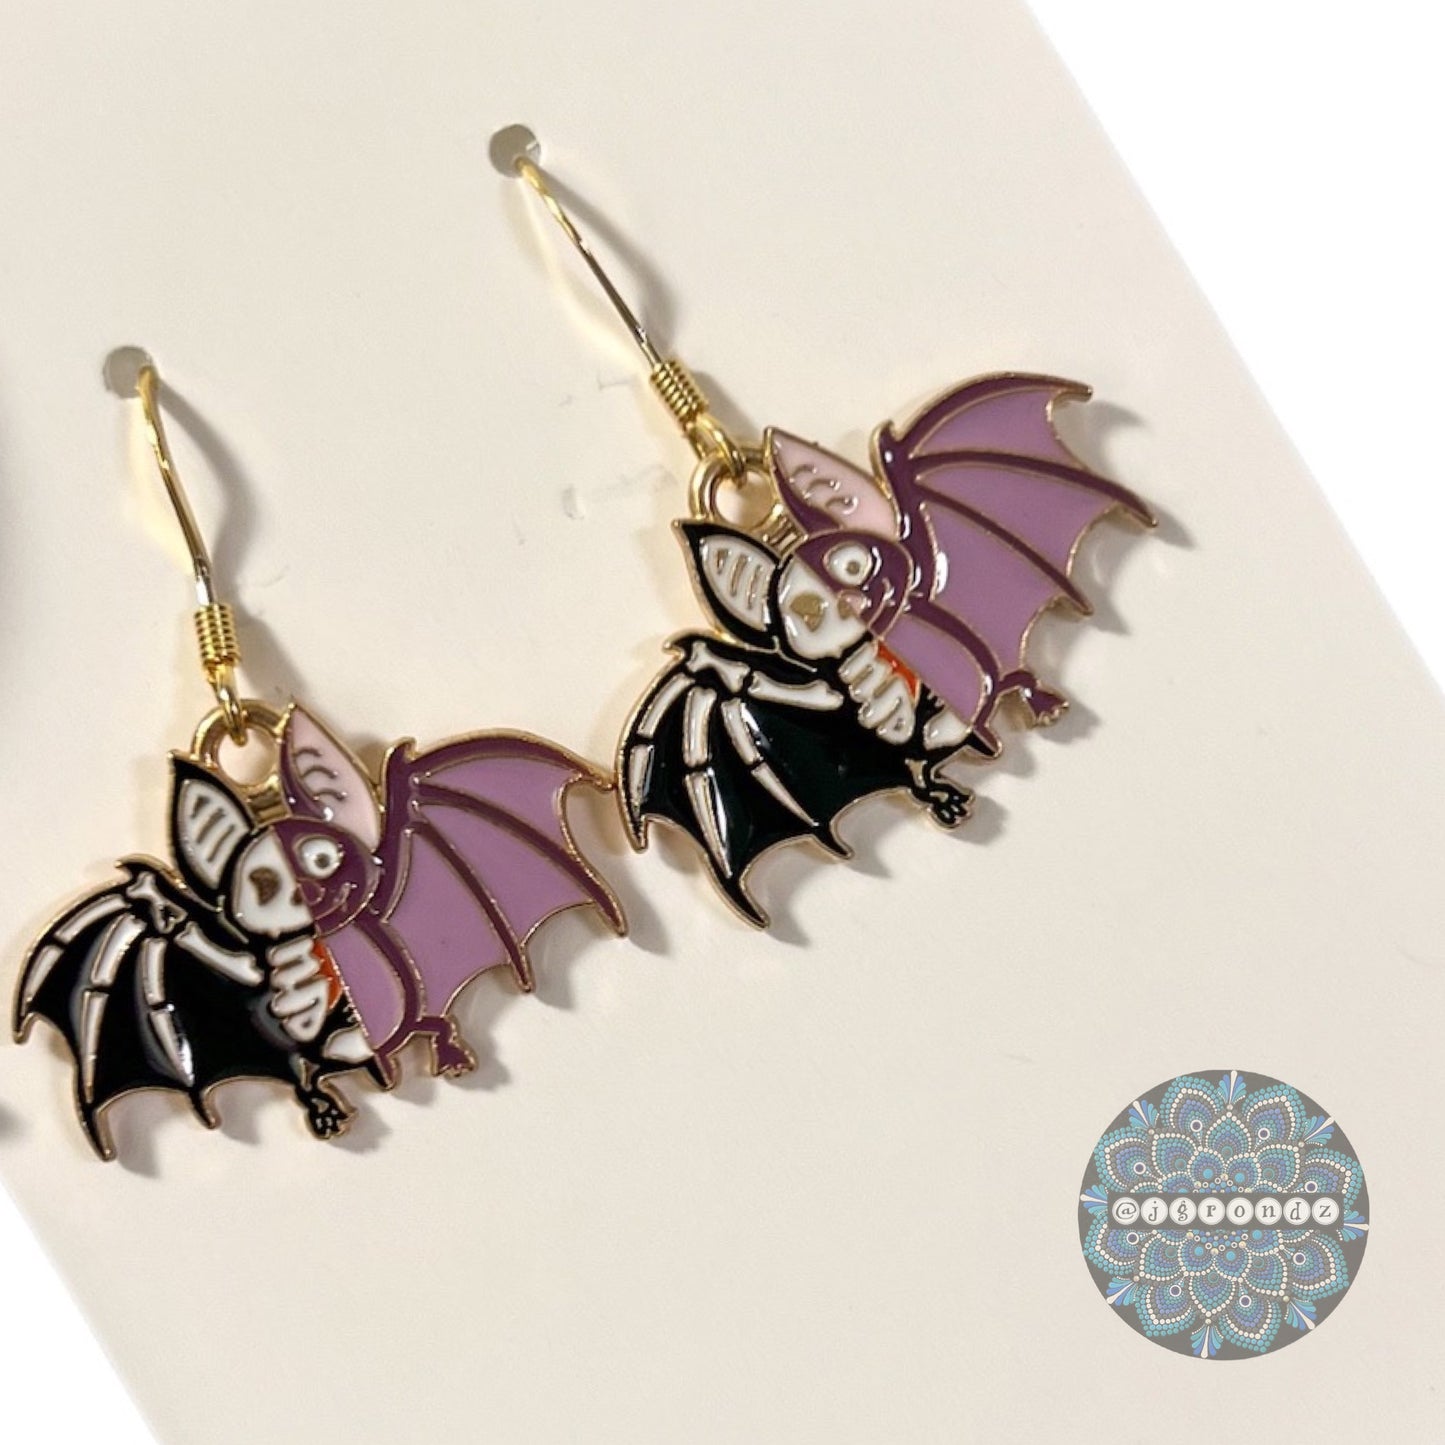 Skeleton Bat Earrings with 18k gold plated Fish Hook Ear Wire for Halloween